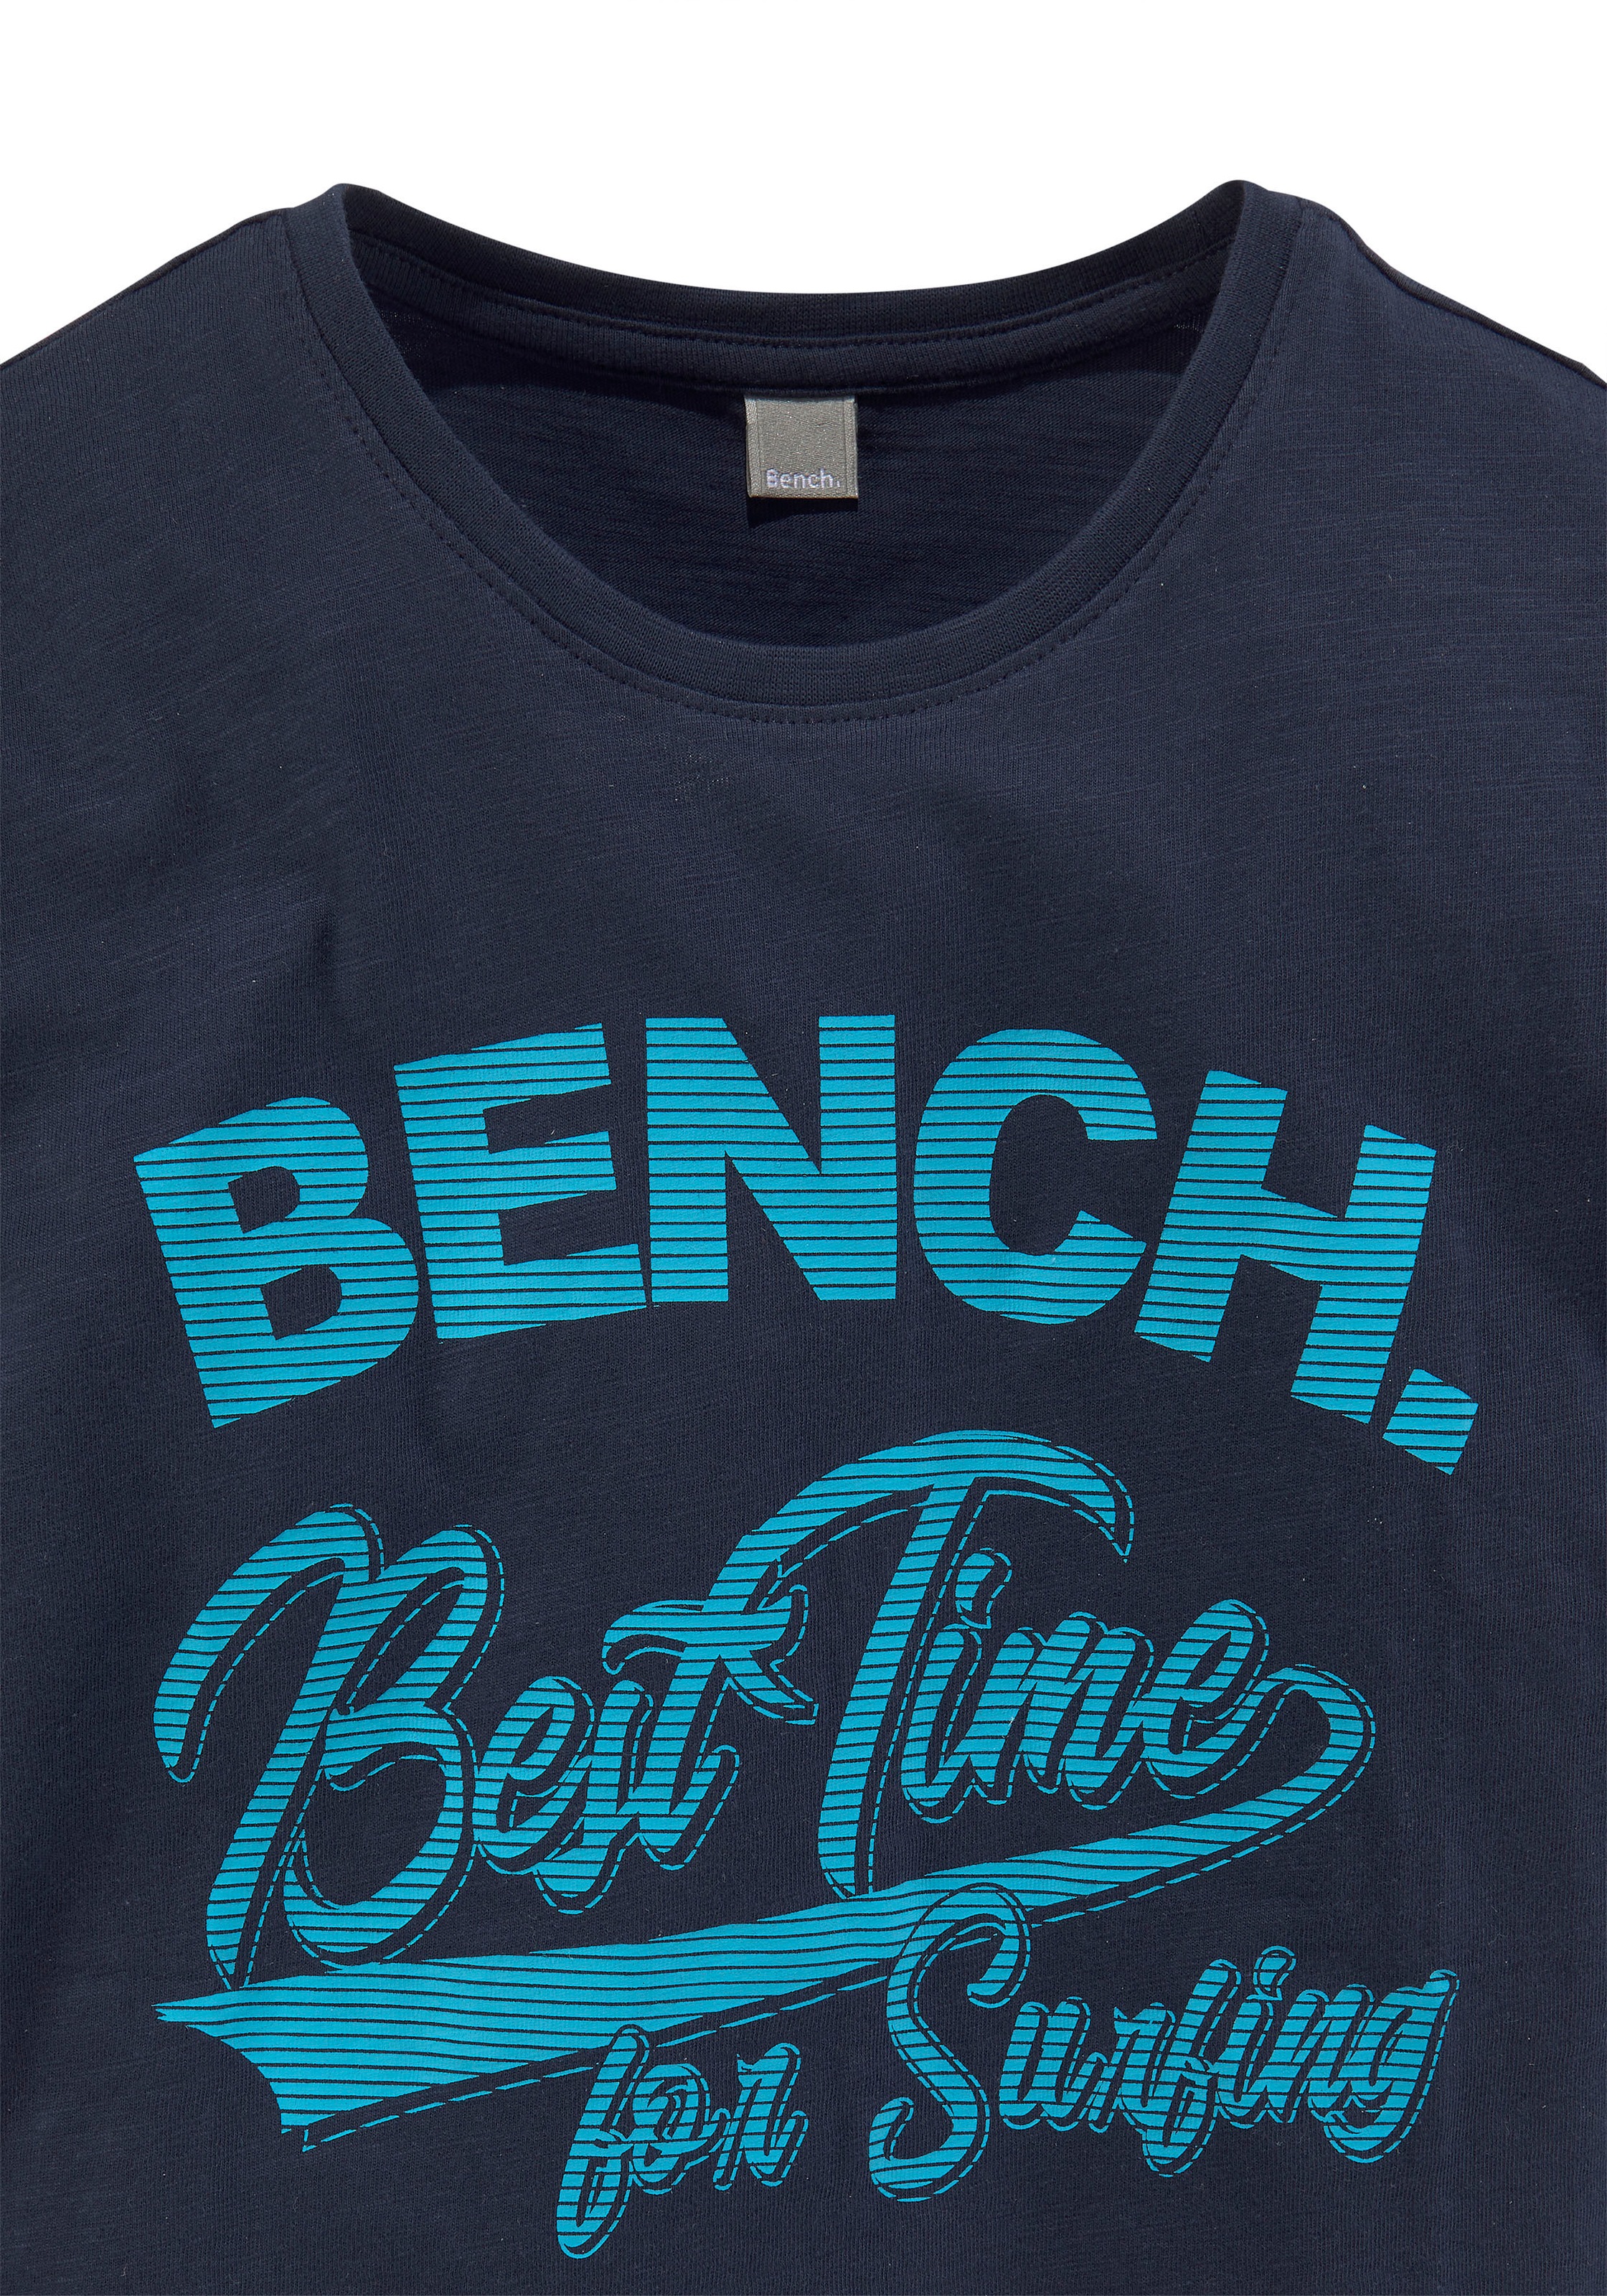 Bench. T-Shirt »Best for time bei OTTO surfing«